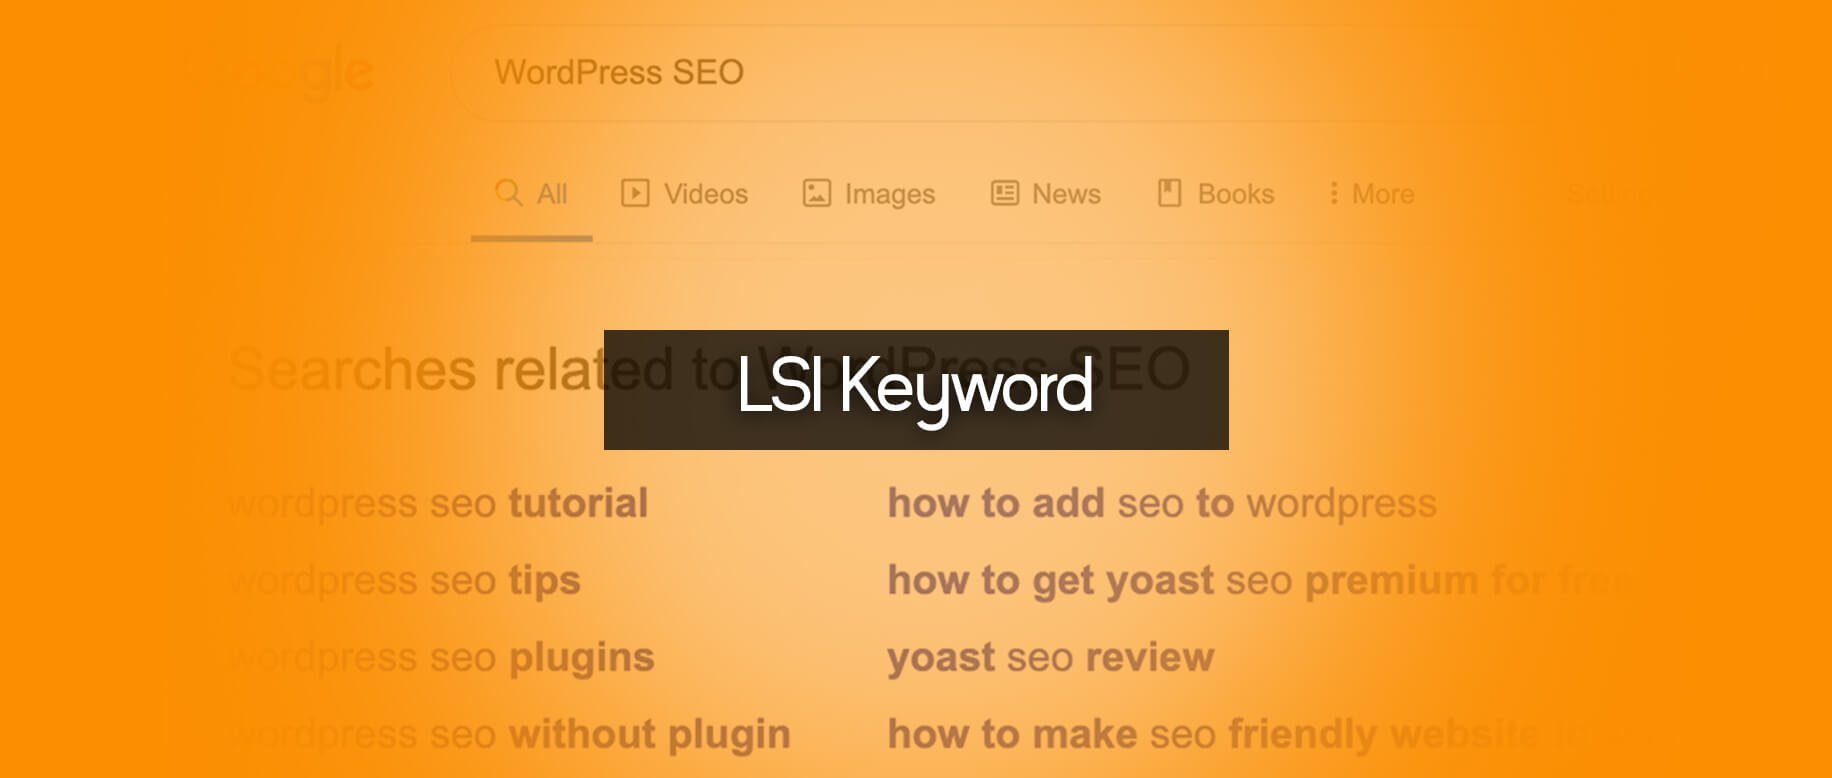 what is LSI keyword